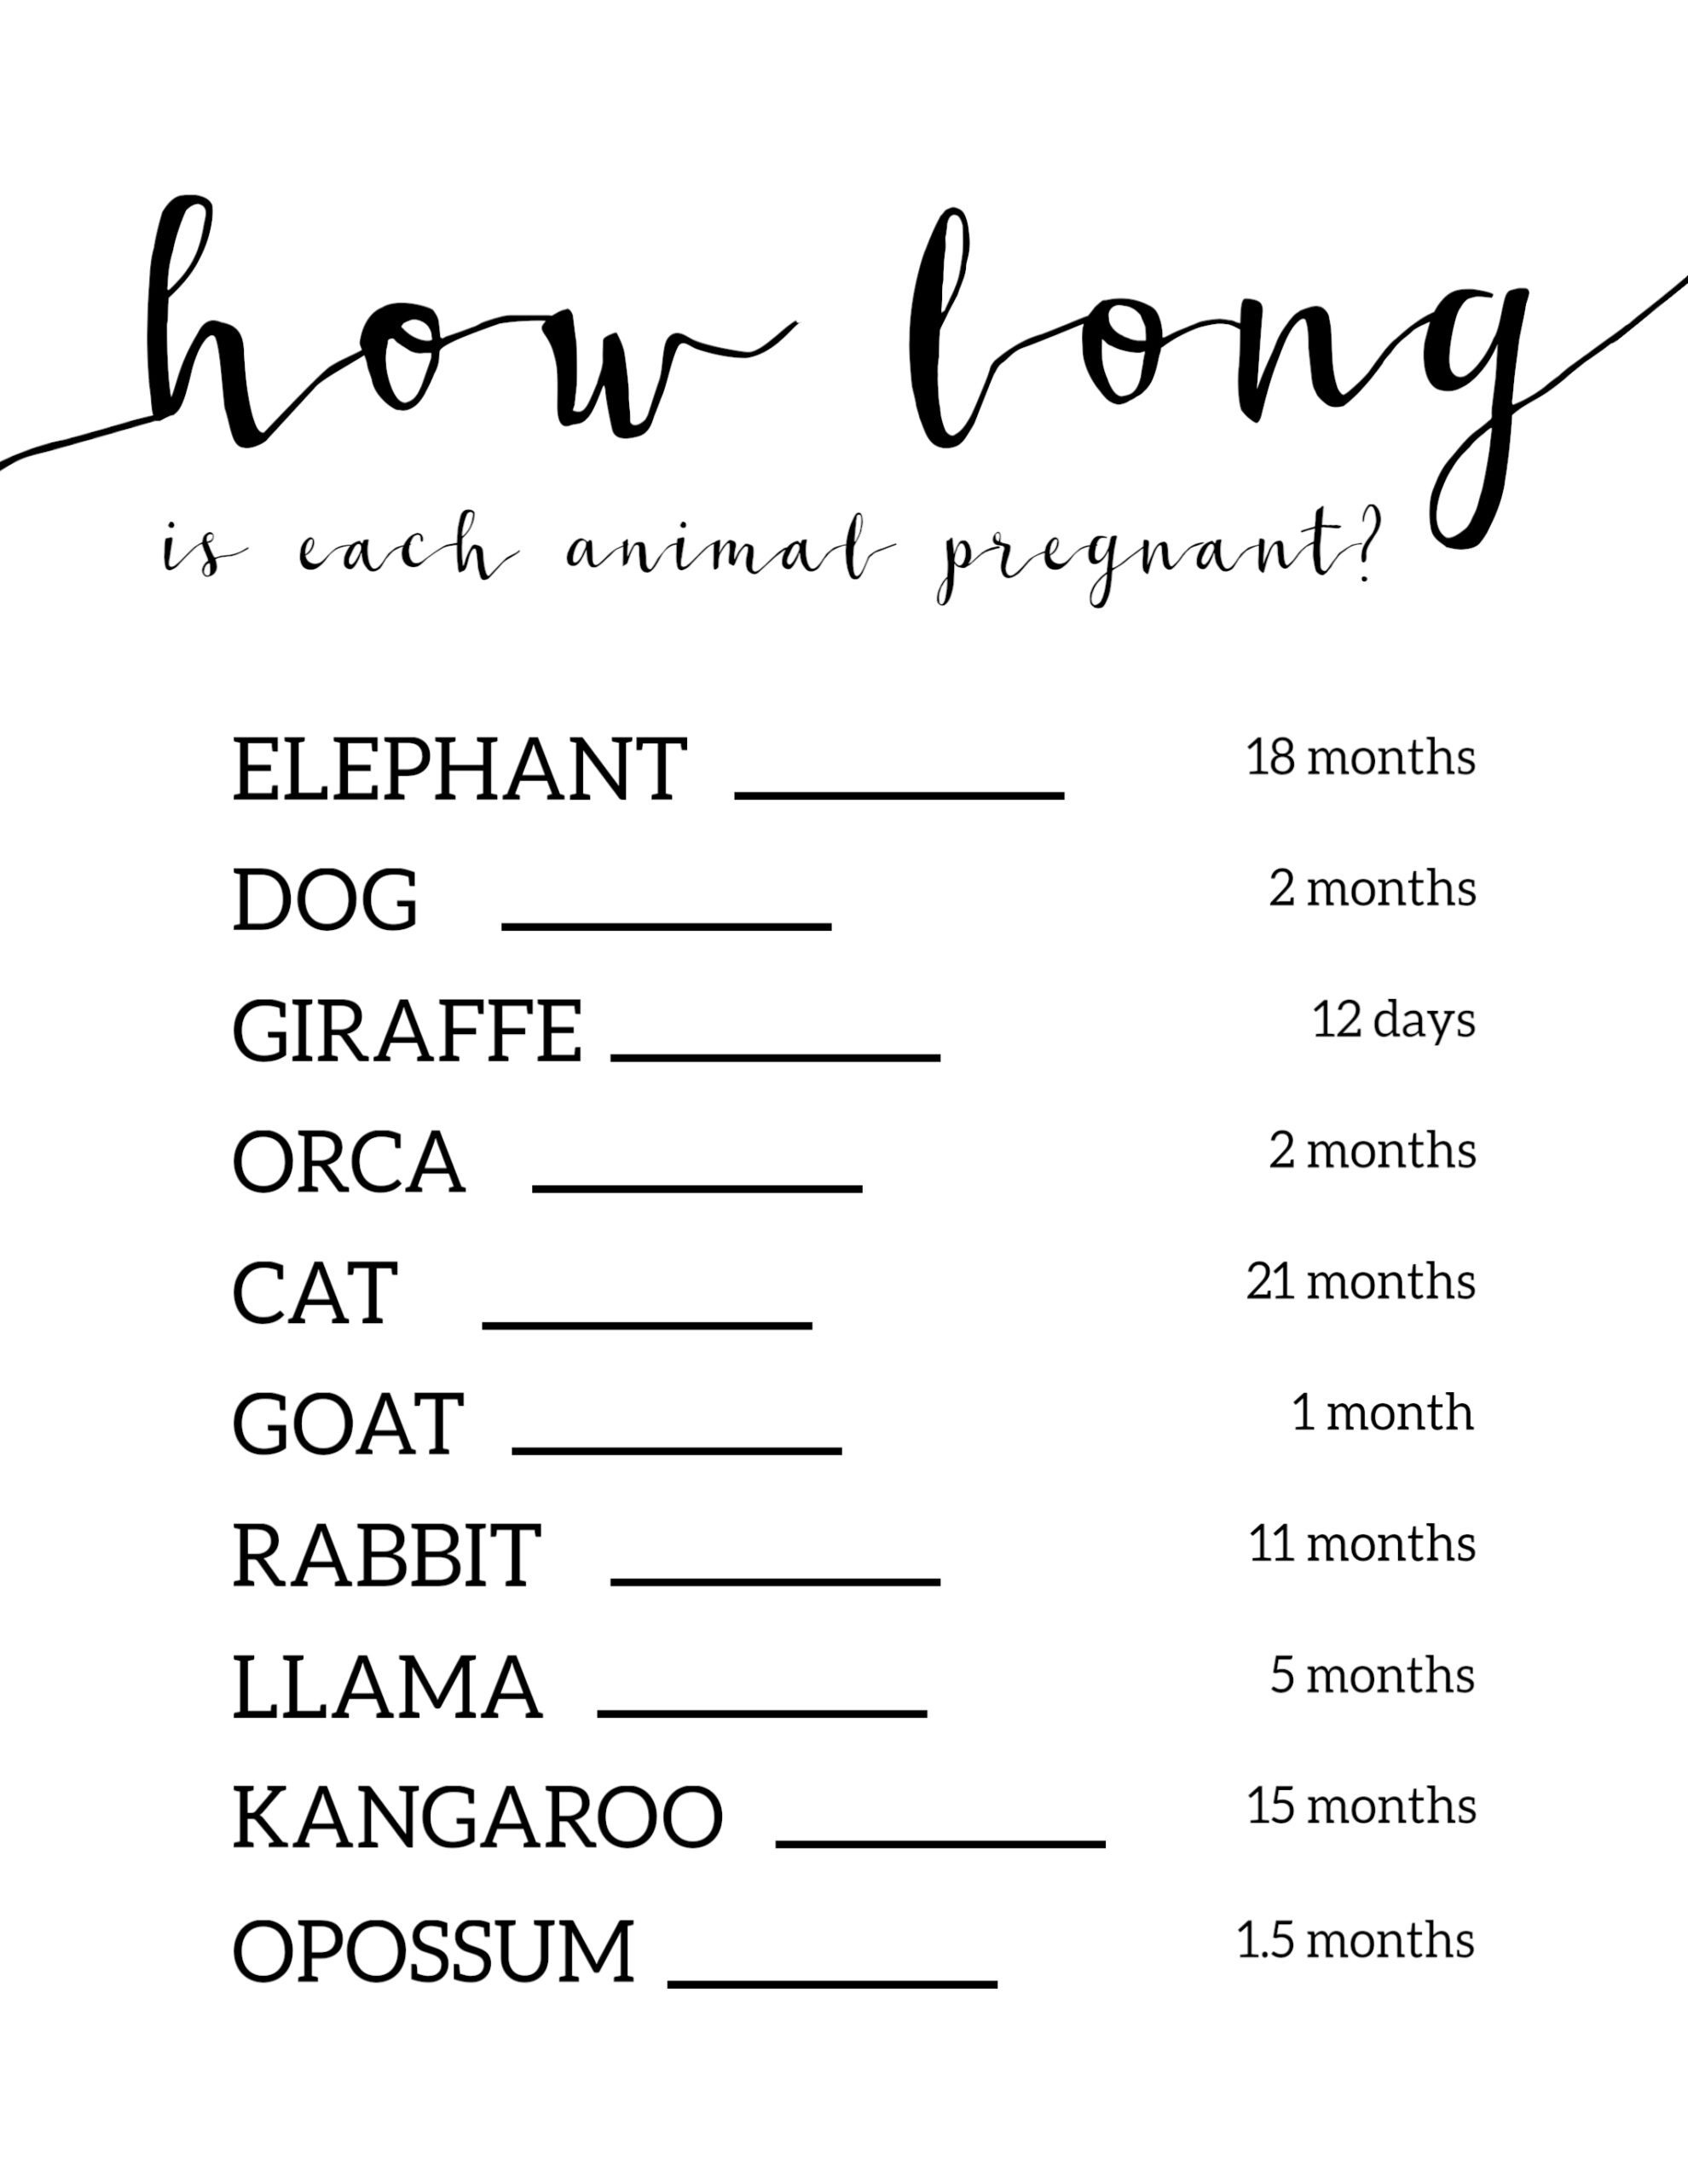 Free Baby Shower Games Printable {Animal Pregnancies} - Paper Trail - Free Printable Templates For Baby Shower Games